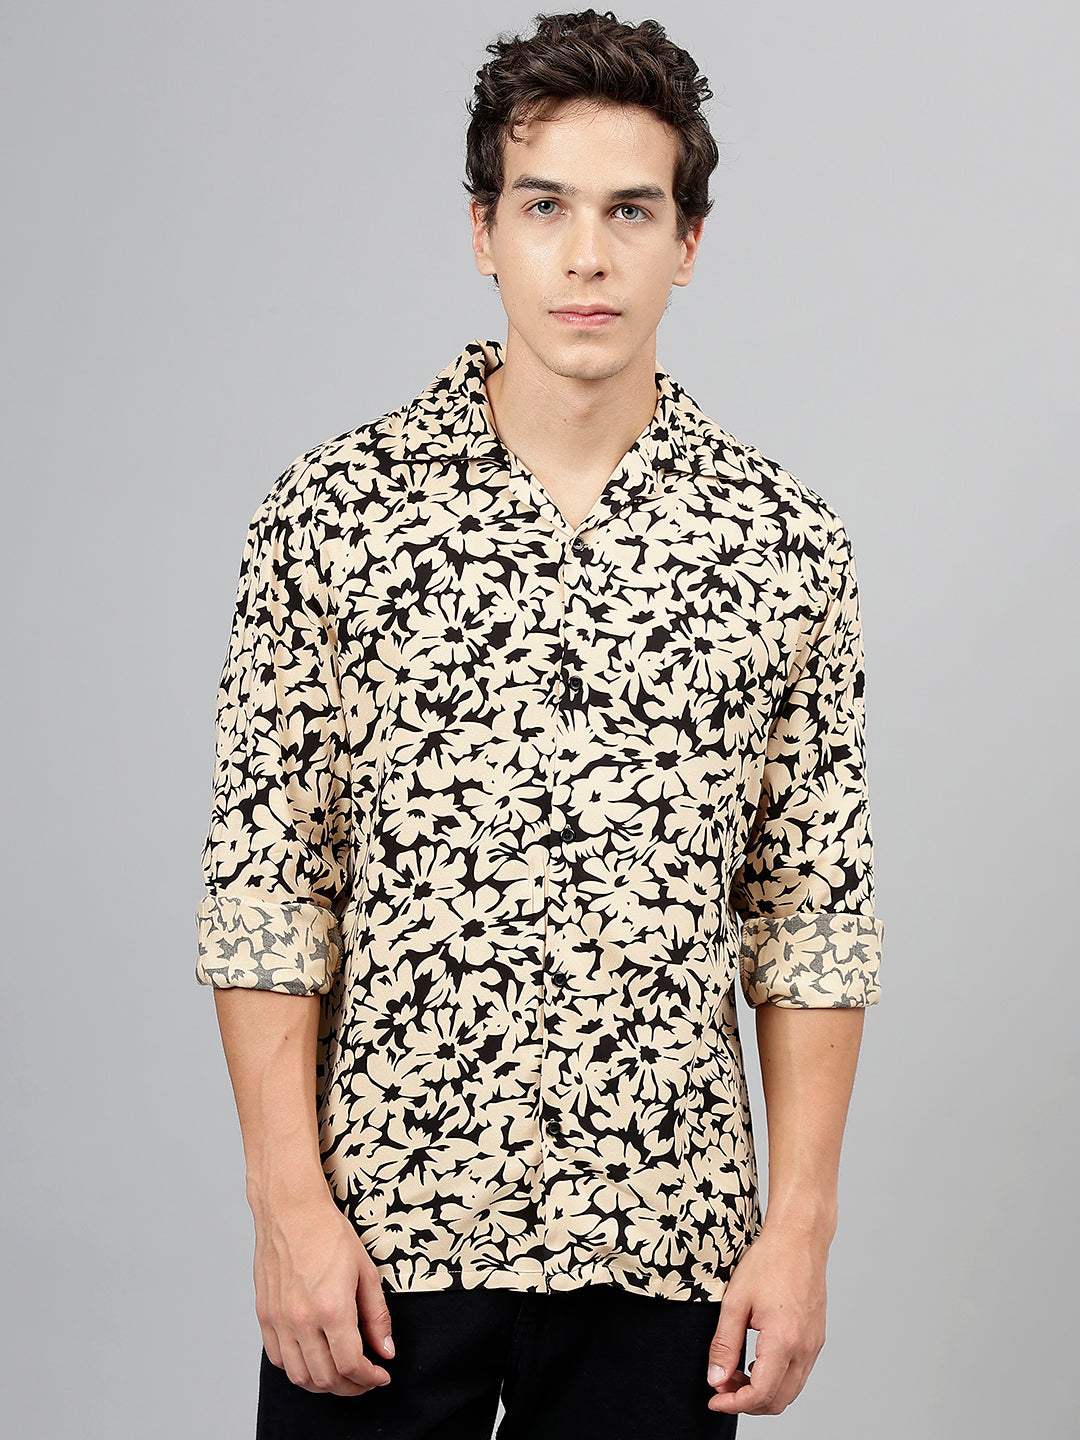 Men Beige & Black Floral Printed Viscose Rayon Relaxed Fit Casual Resort Shirt